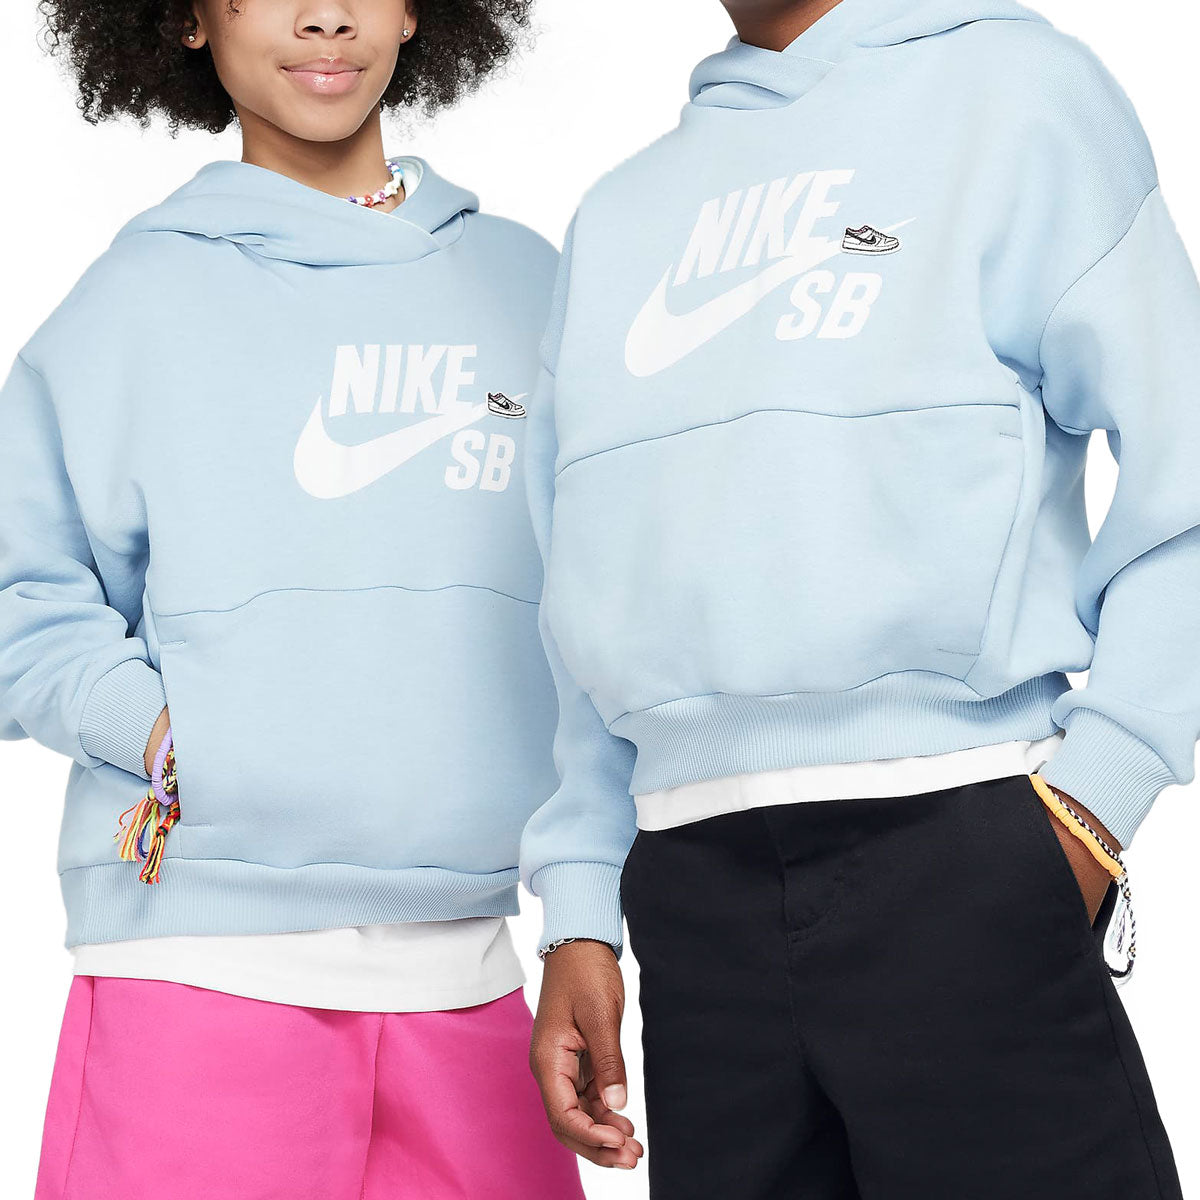 Nike SB Youth Icon Fleece Easy On Hoodie - Light Armory Blue/Barely Green/White image 2